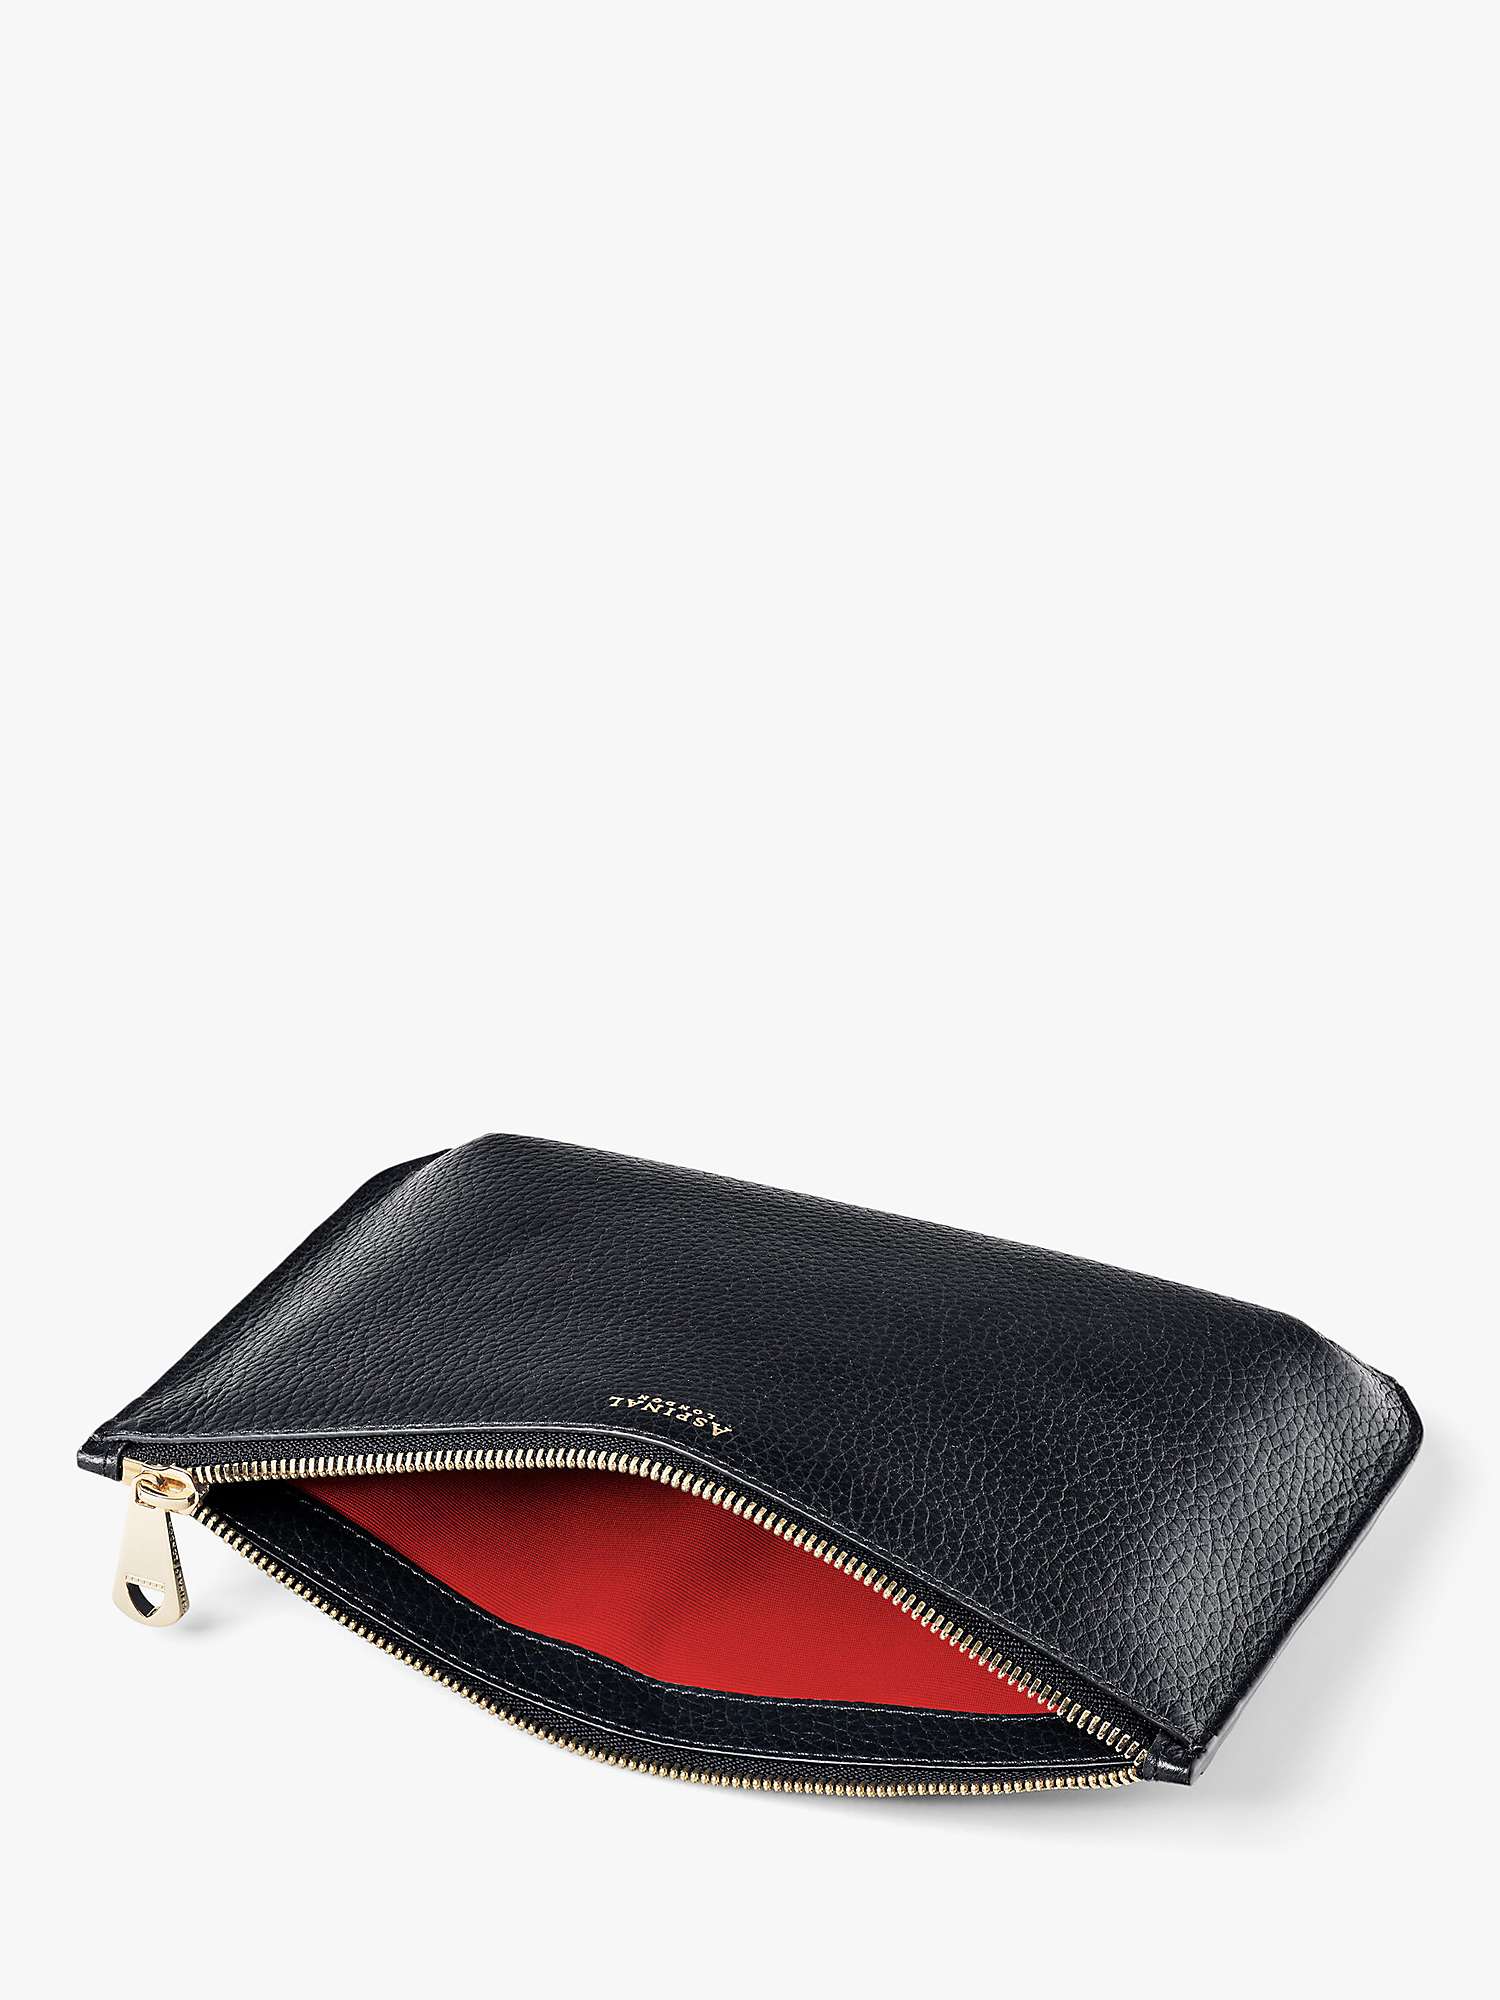 Buy Aspinal of London Large Ella Pebble Grain Leather Pouch Online at johnlewis.com